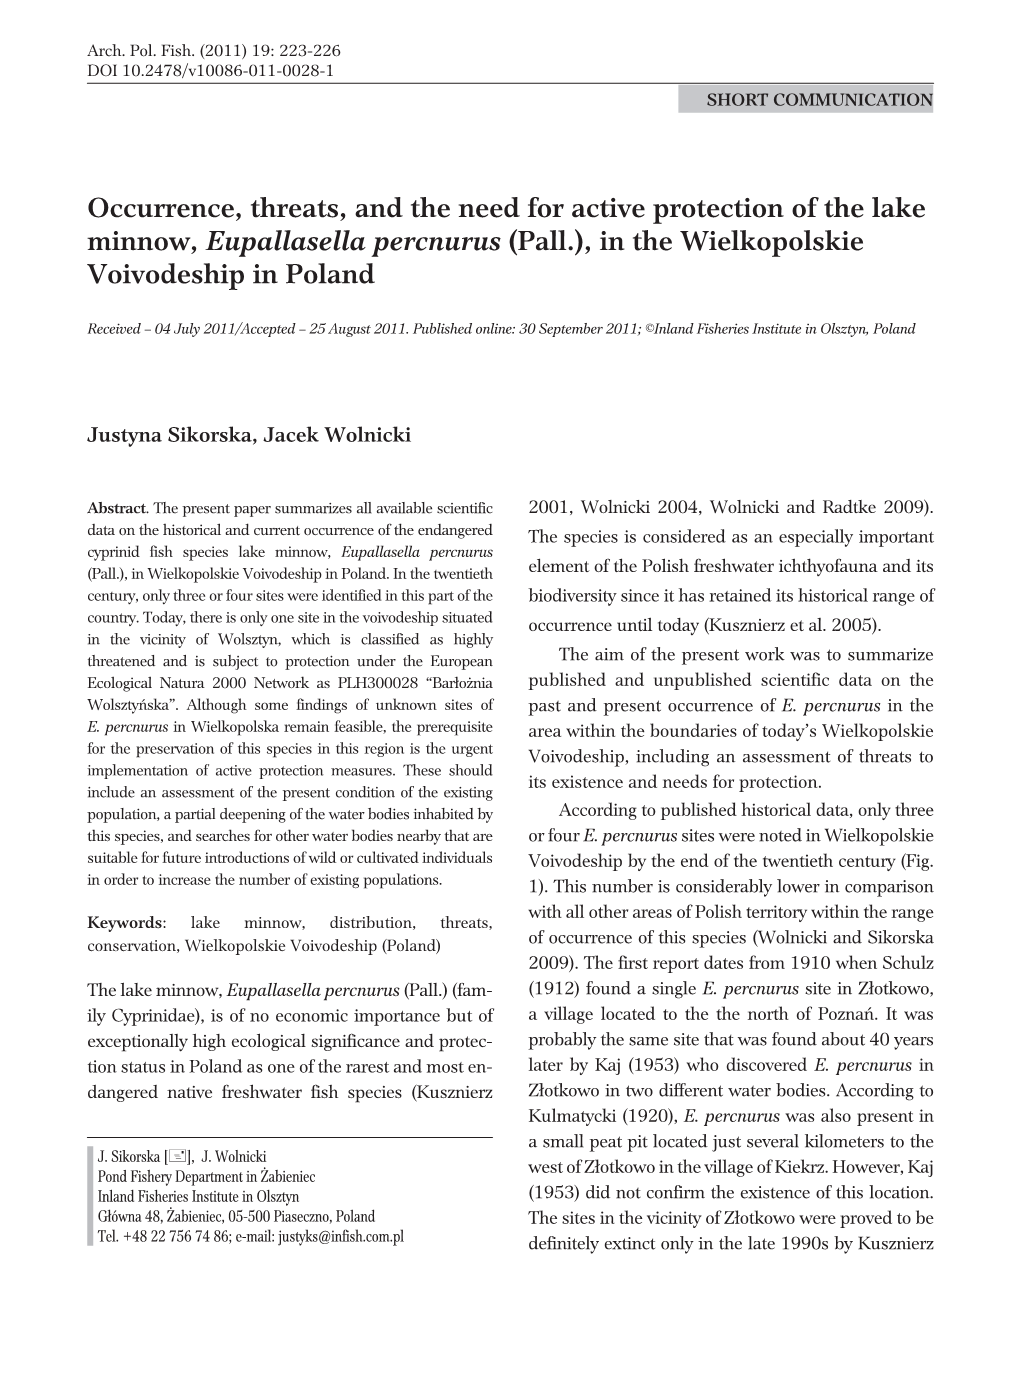 Occurrence, Threats, and the Need for Active Protection of the Lake Minnow, Eupallasella Percnurus (Pall.), in the Wielkopolskie Voivodeship in Poland